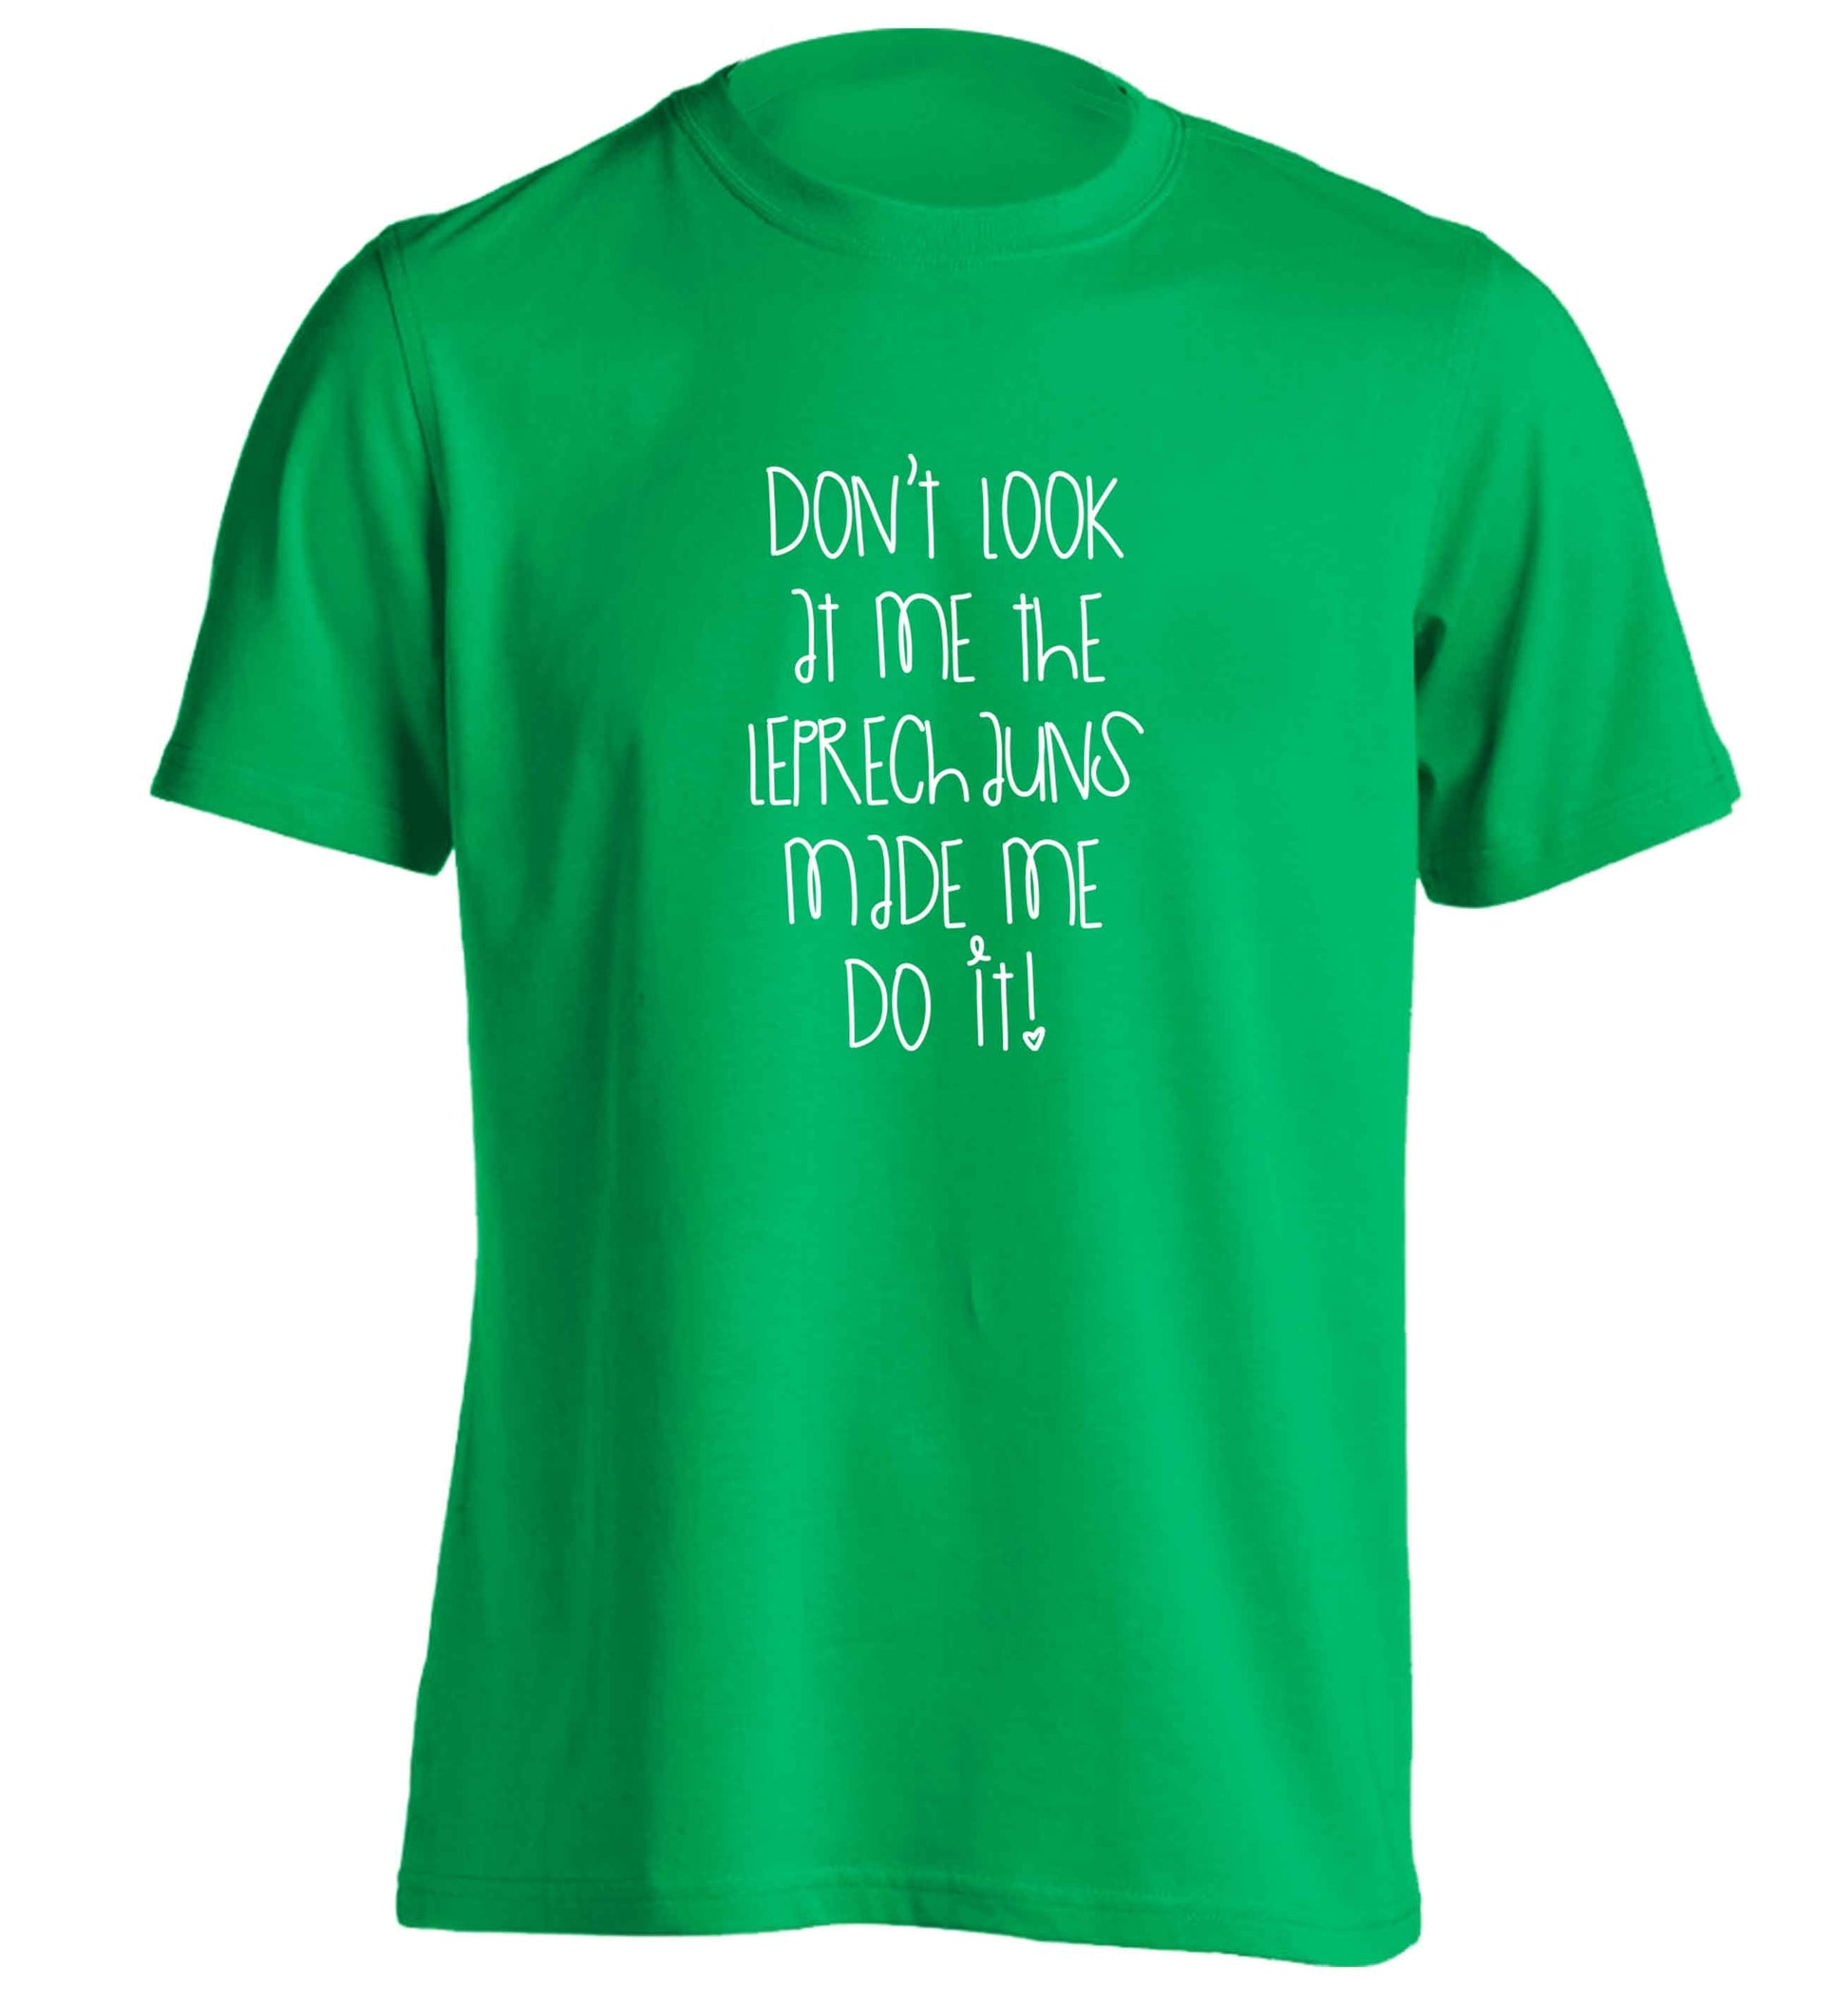 Don't look at me the leprechauns made me do it adults unisex green Tshirt 2XL